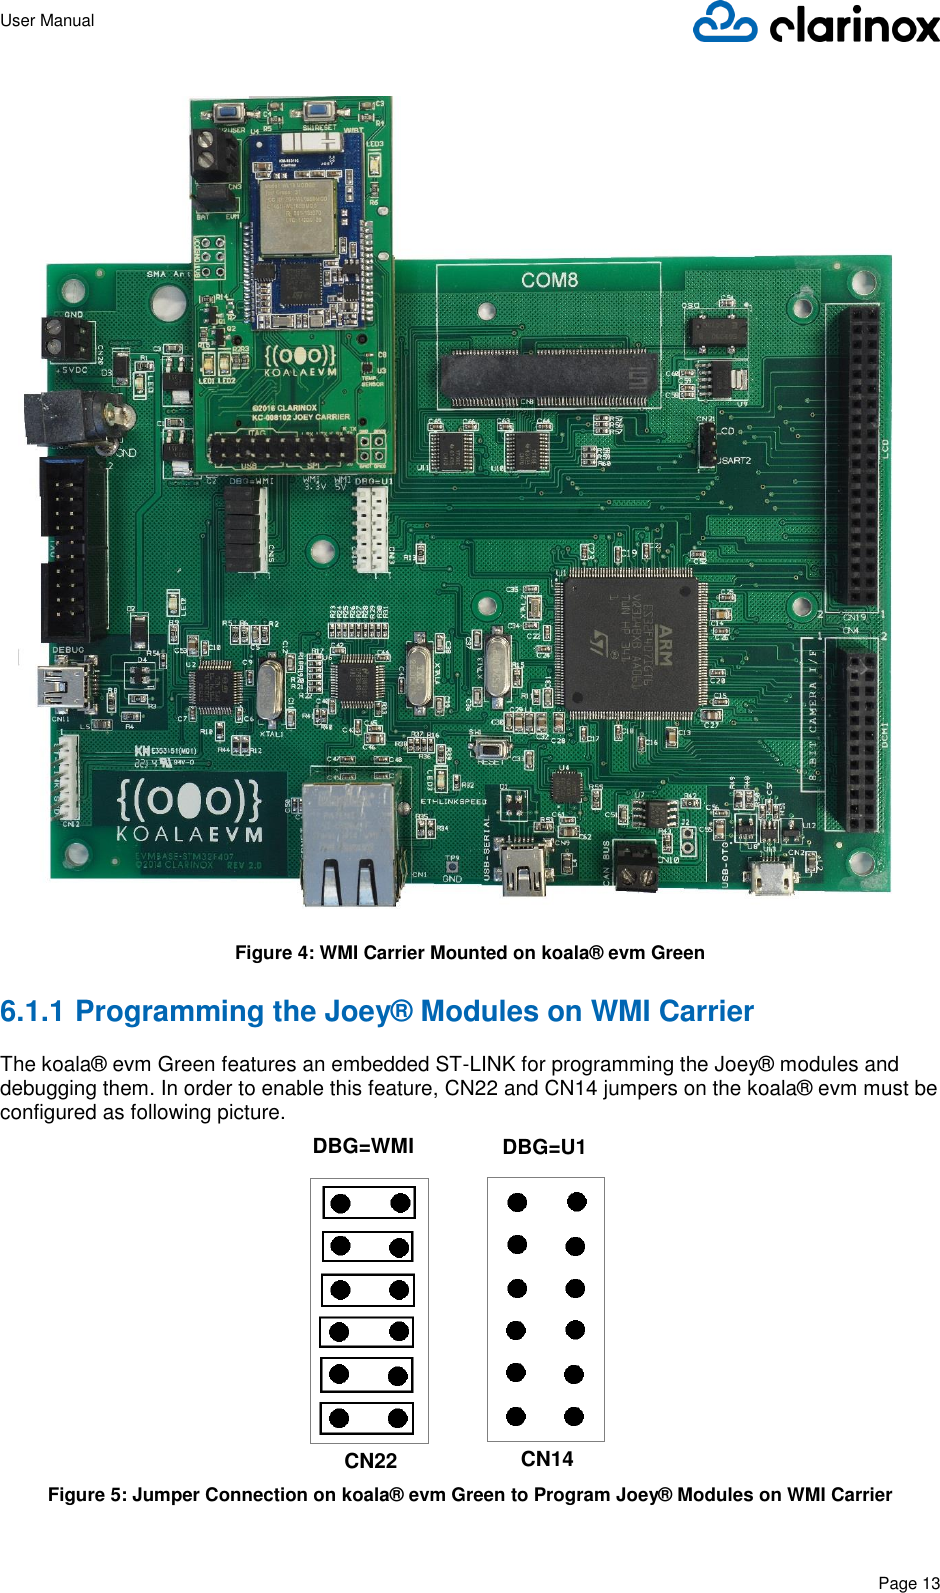 User Manual      Page 13   Figure 4: WMI Carrier Mounted on koala® evm Green 6.1.1 Programming the Joey® Modules on WMI Carrier  The koala® evm Green features an embedded ST-LINK for programming the Joey® modules and debugging them. In order to enable this feature, CN22 and CN14 jumpers on the koala® evm must be configured as following picture.                Figure 5: Jumper Connection on koala® evm Green to Program Joey® Modules on WMI Carrier  CN22 CN14 DBG=WMI DBG=U1 